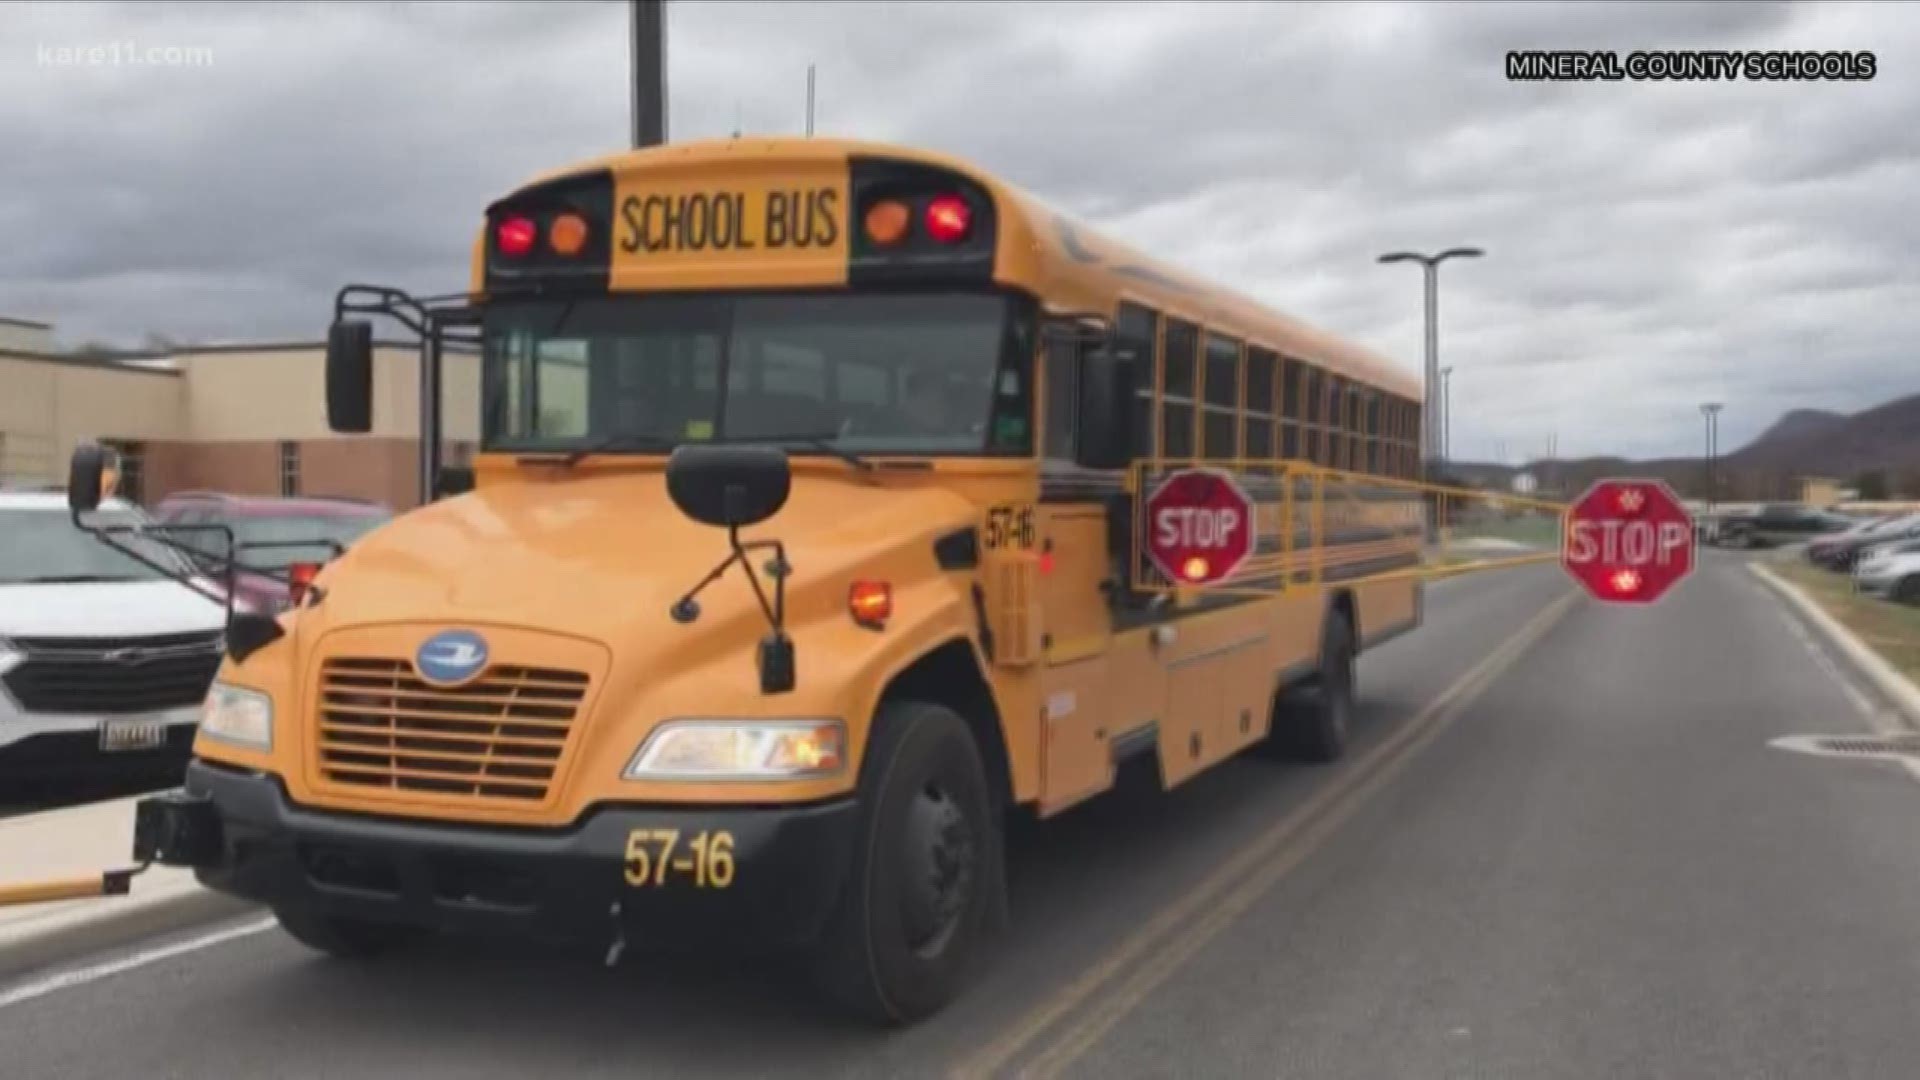 Since it added the extended arm, Mineral County Schools has seen a significant drop in the number of drivers illegally passing stopped school buses.